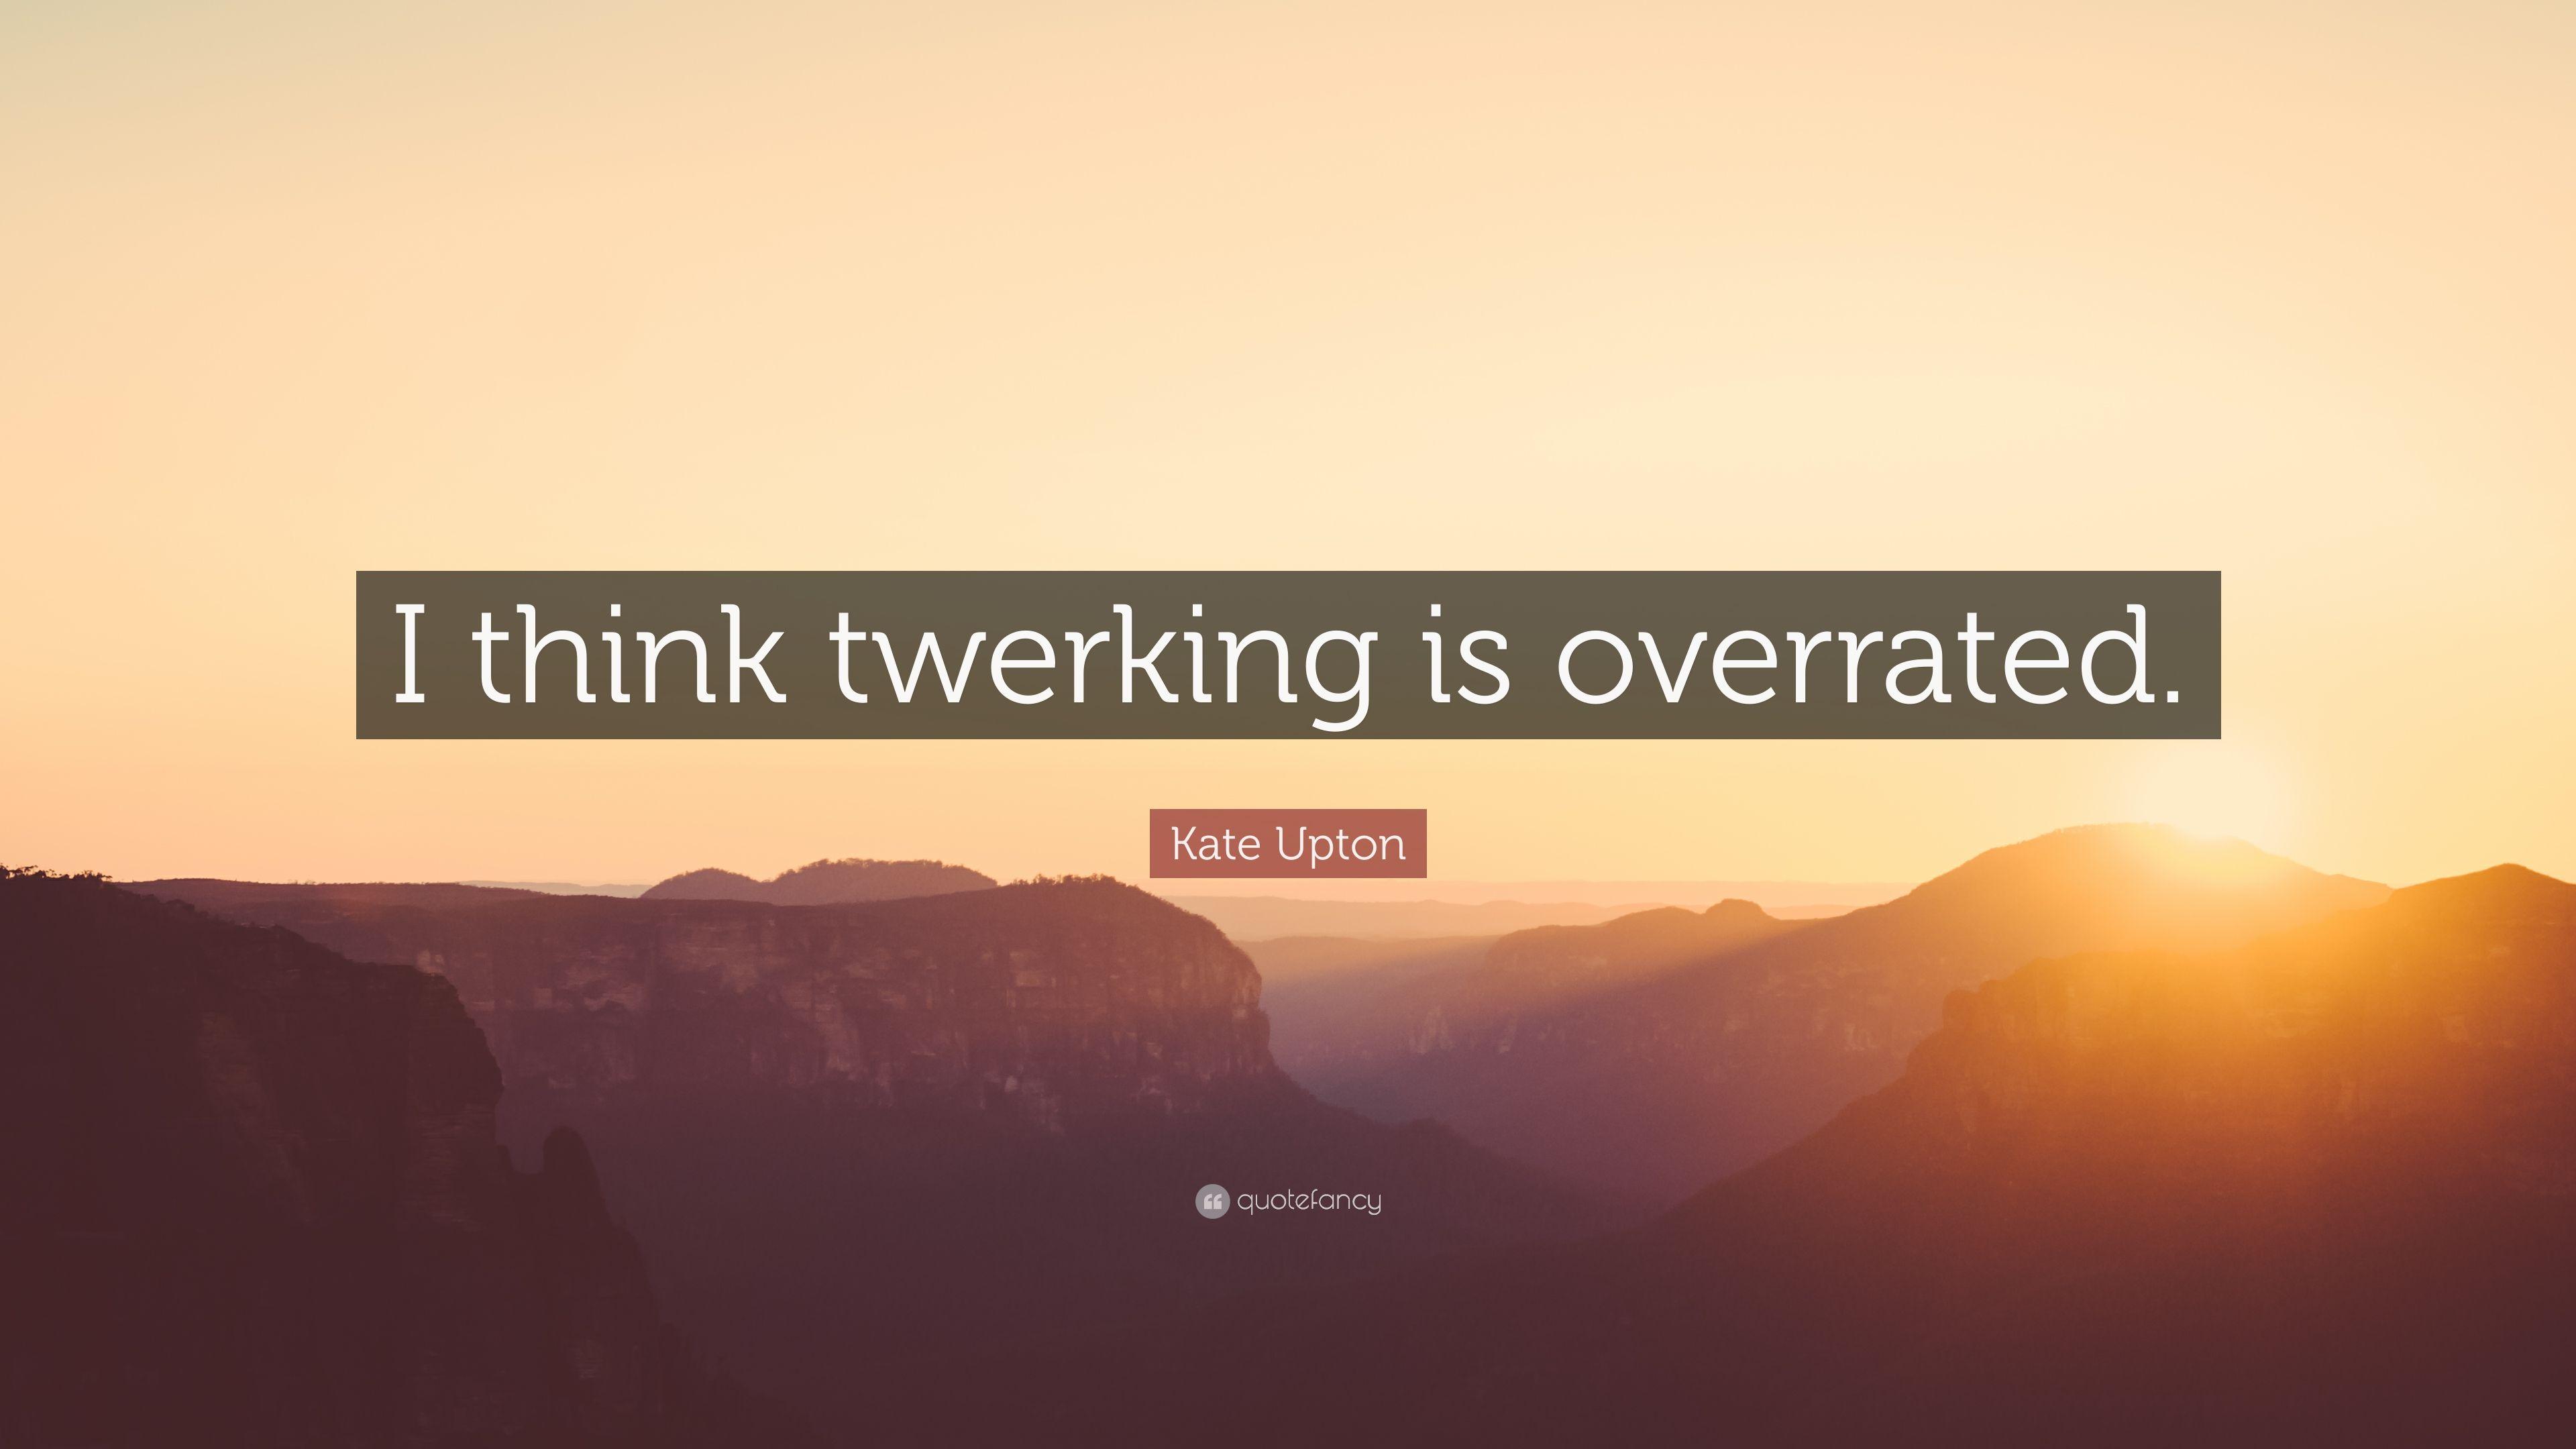 Kate Upton Quote: “I think twerking is overrated.” 7 wallpaper